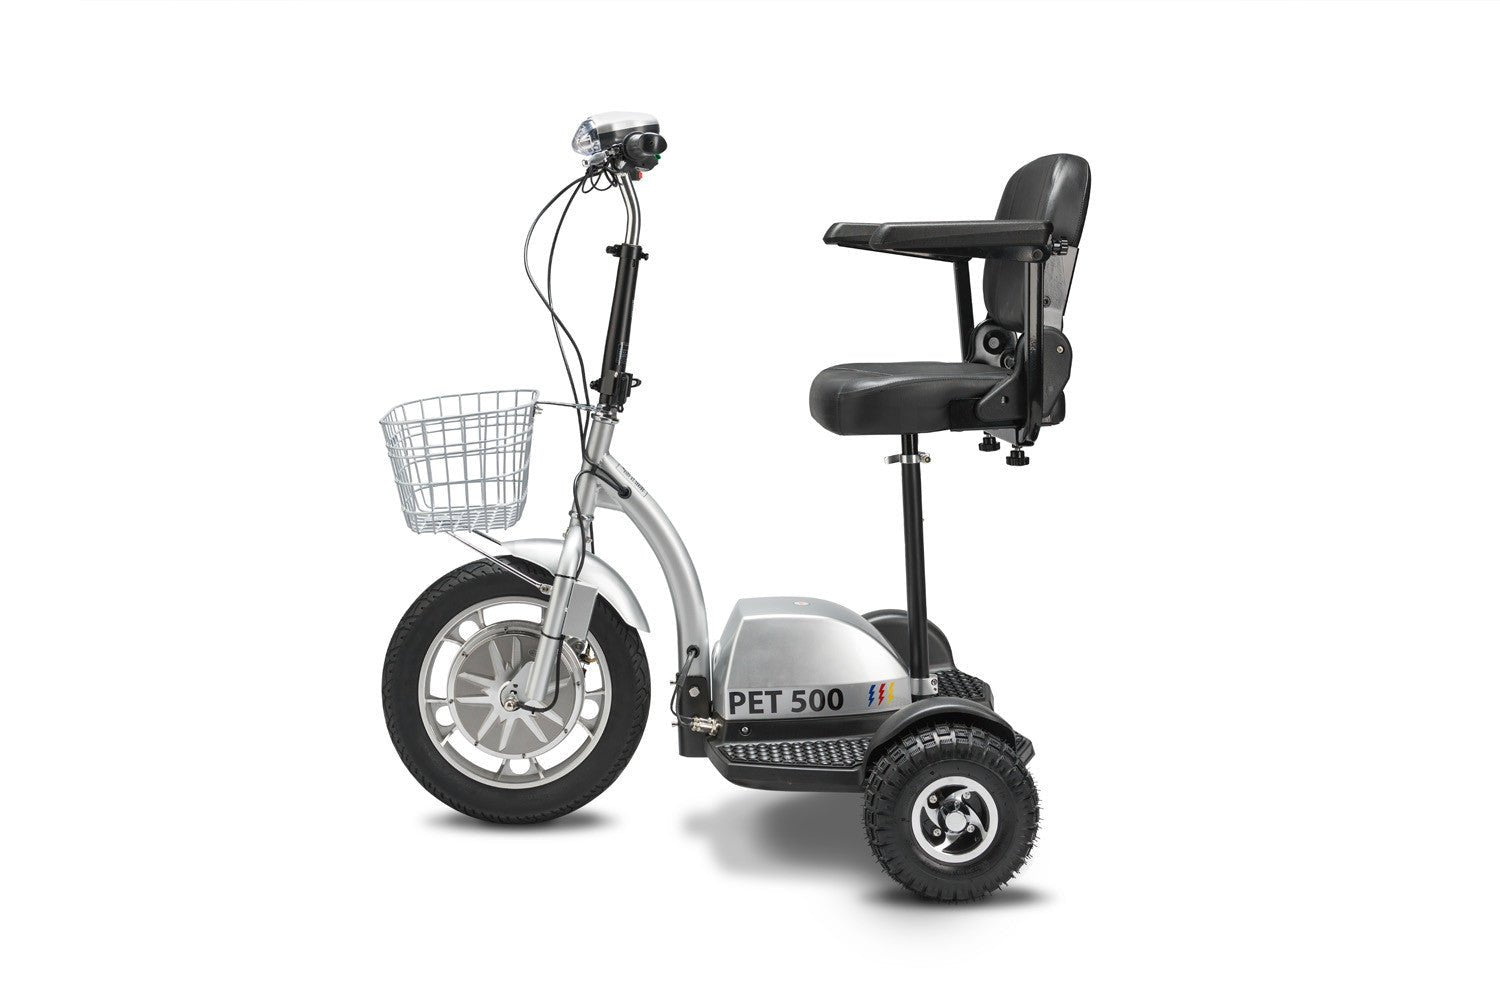 PET Pro Flex 500 48V Collapsible Folding Electric Tricycle Scooter - Upzy.com